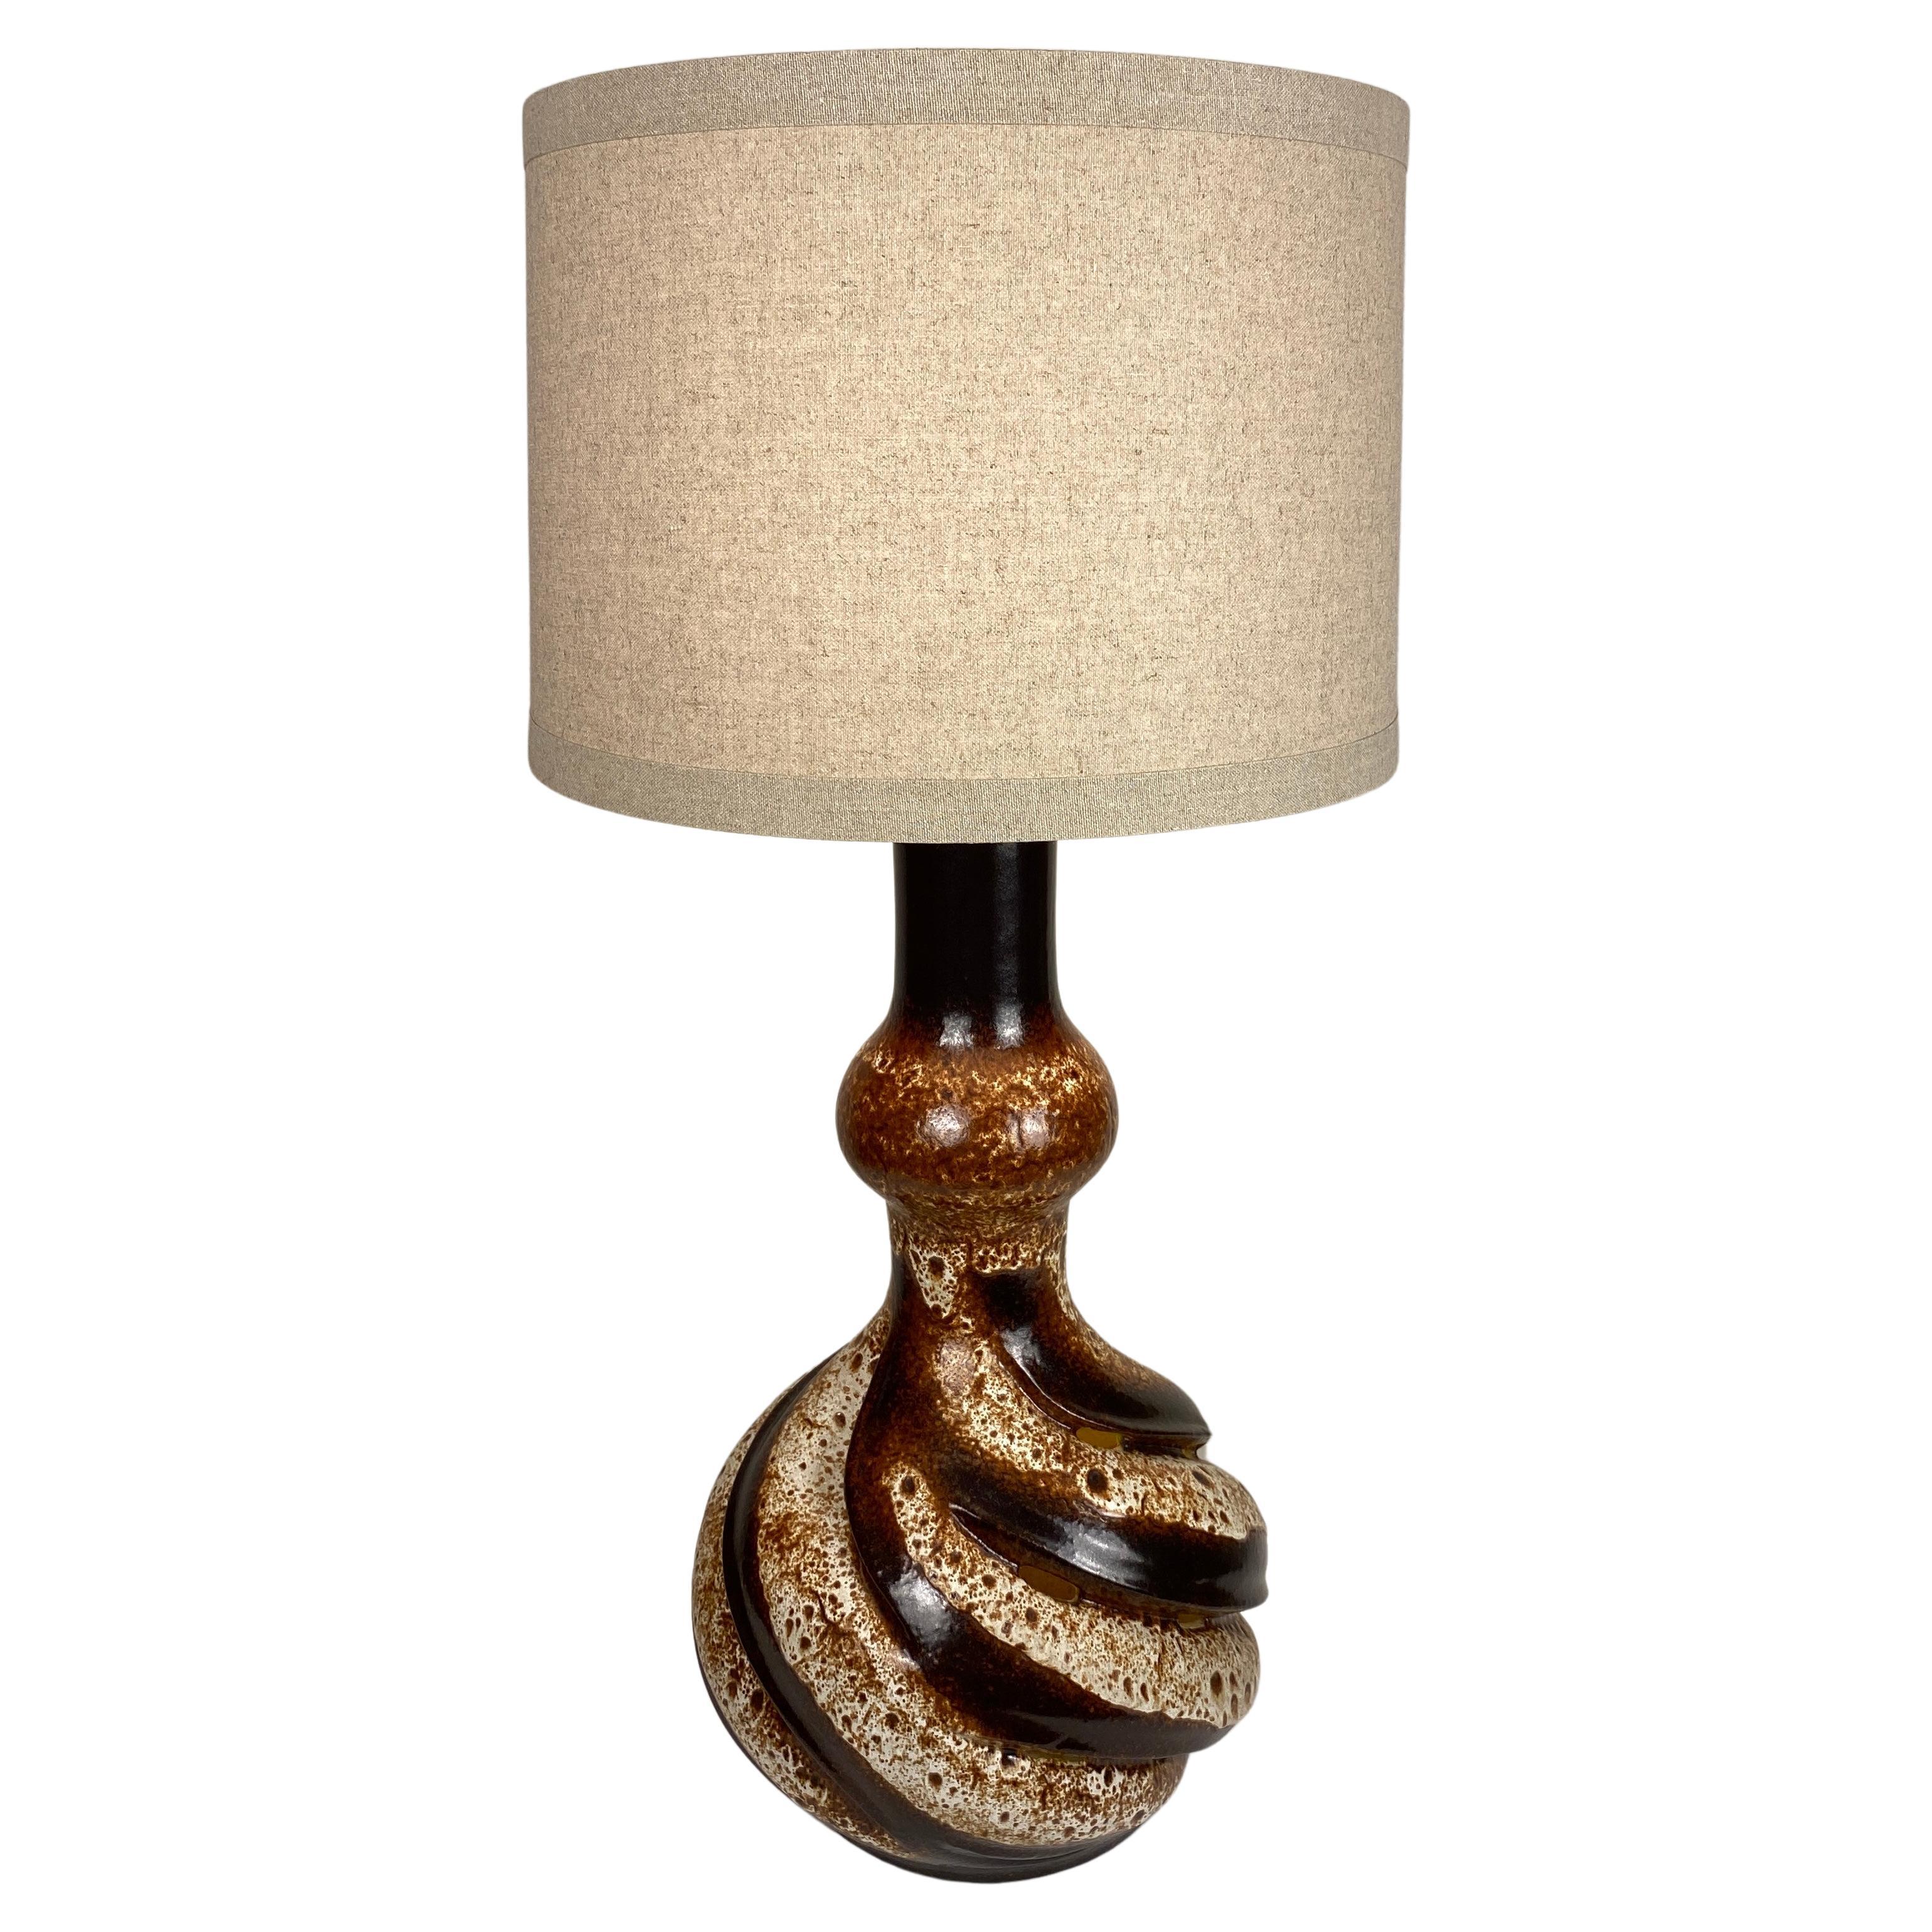 Large Mid-Century Sculptural Ceramic Table Lamp Beige & Brown For Sale